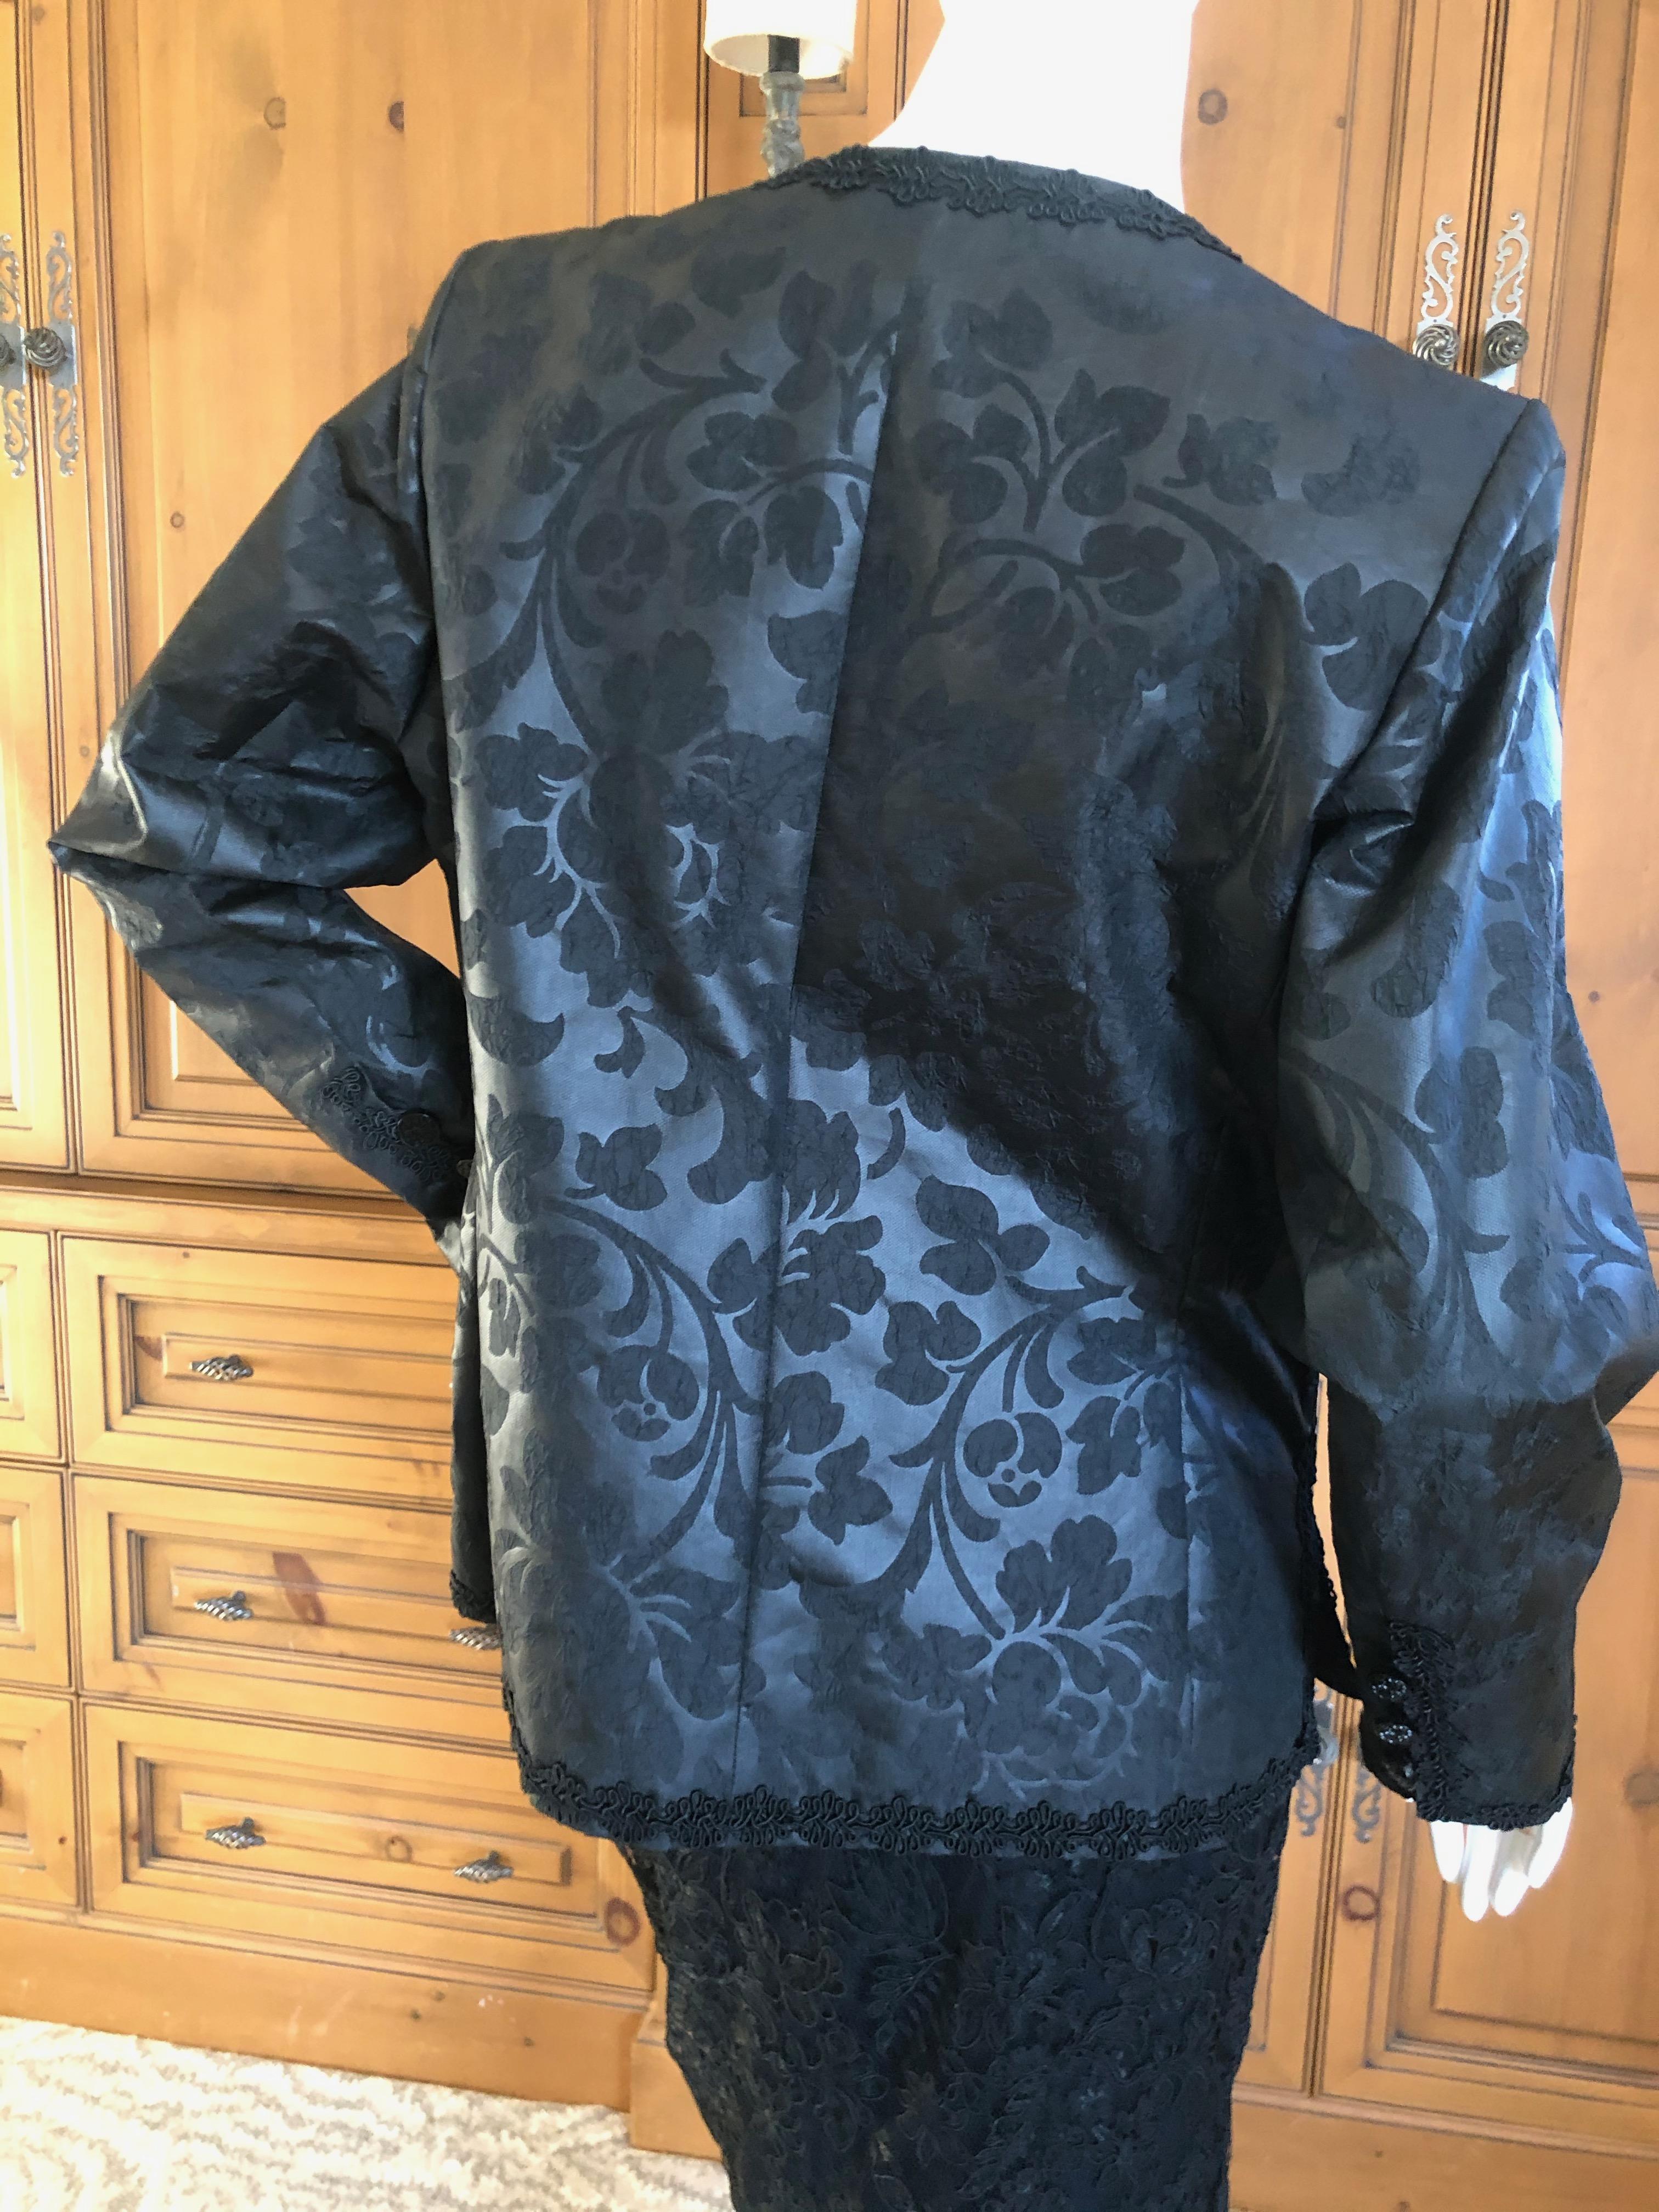 Yves Saint Laurent Vintage 1980's Black Brocade Jacket with Soutache Piping For Sale 5